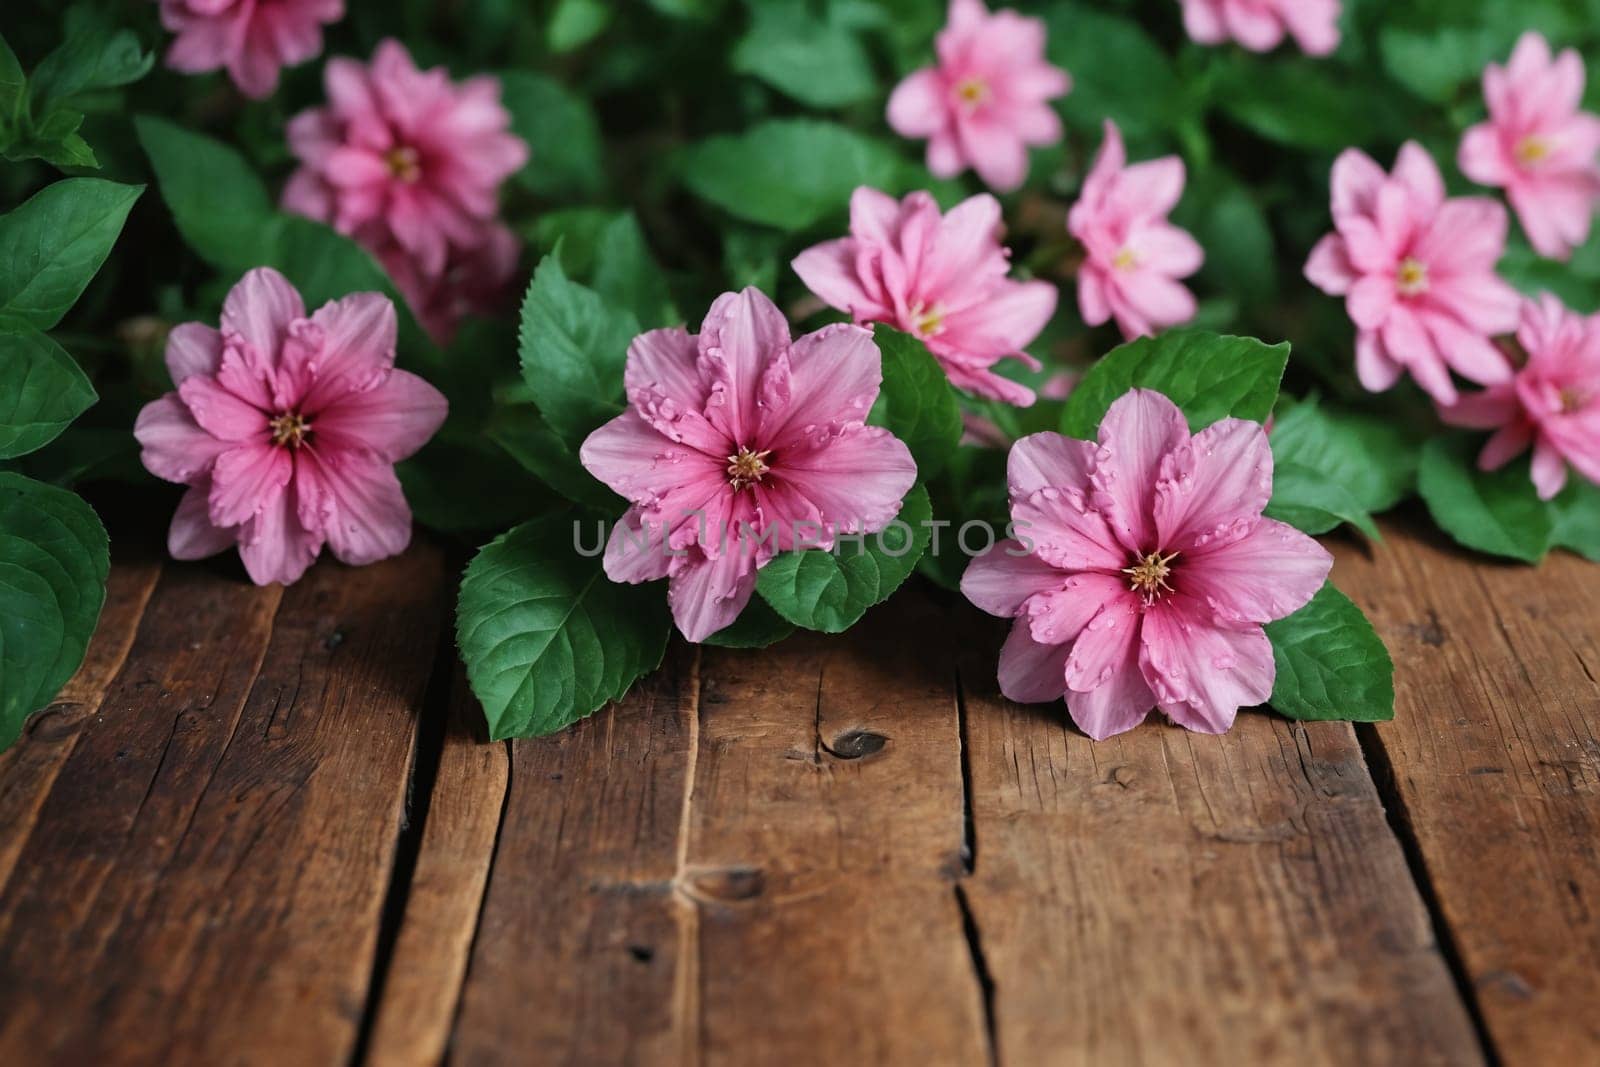 Natural Beauty: Pink Blooms and Green Foliage Over Knotted Wood by Andre1ns